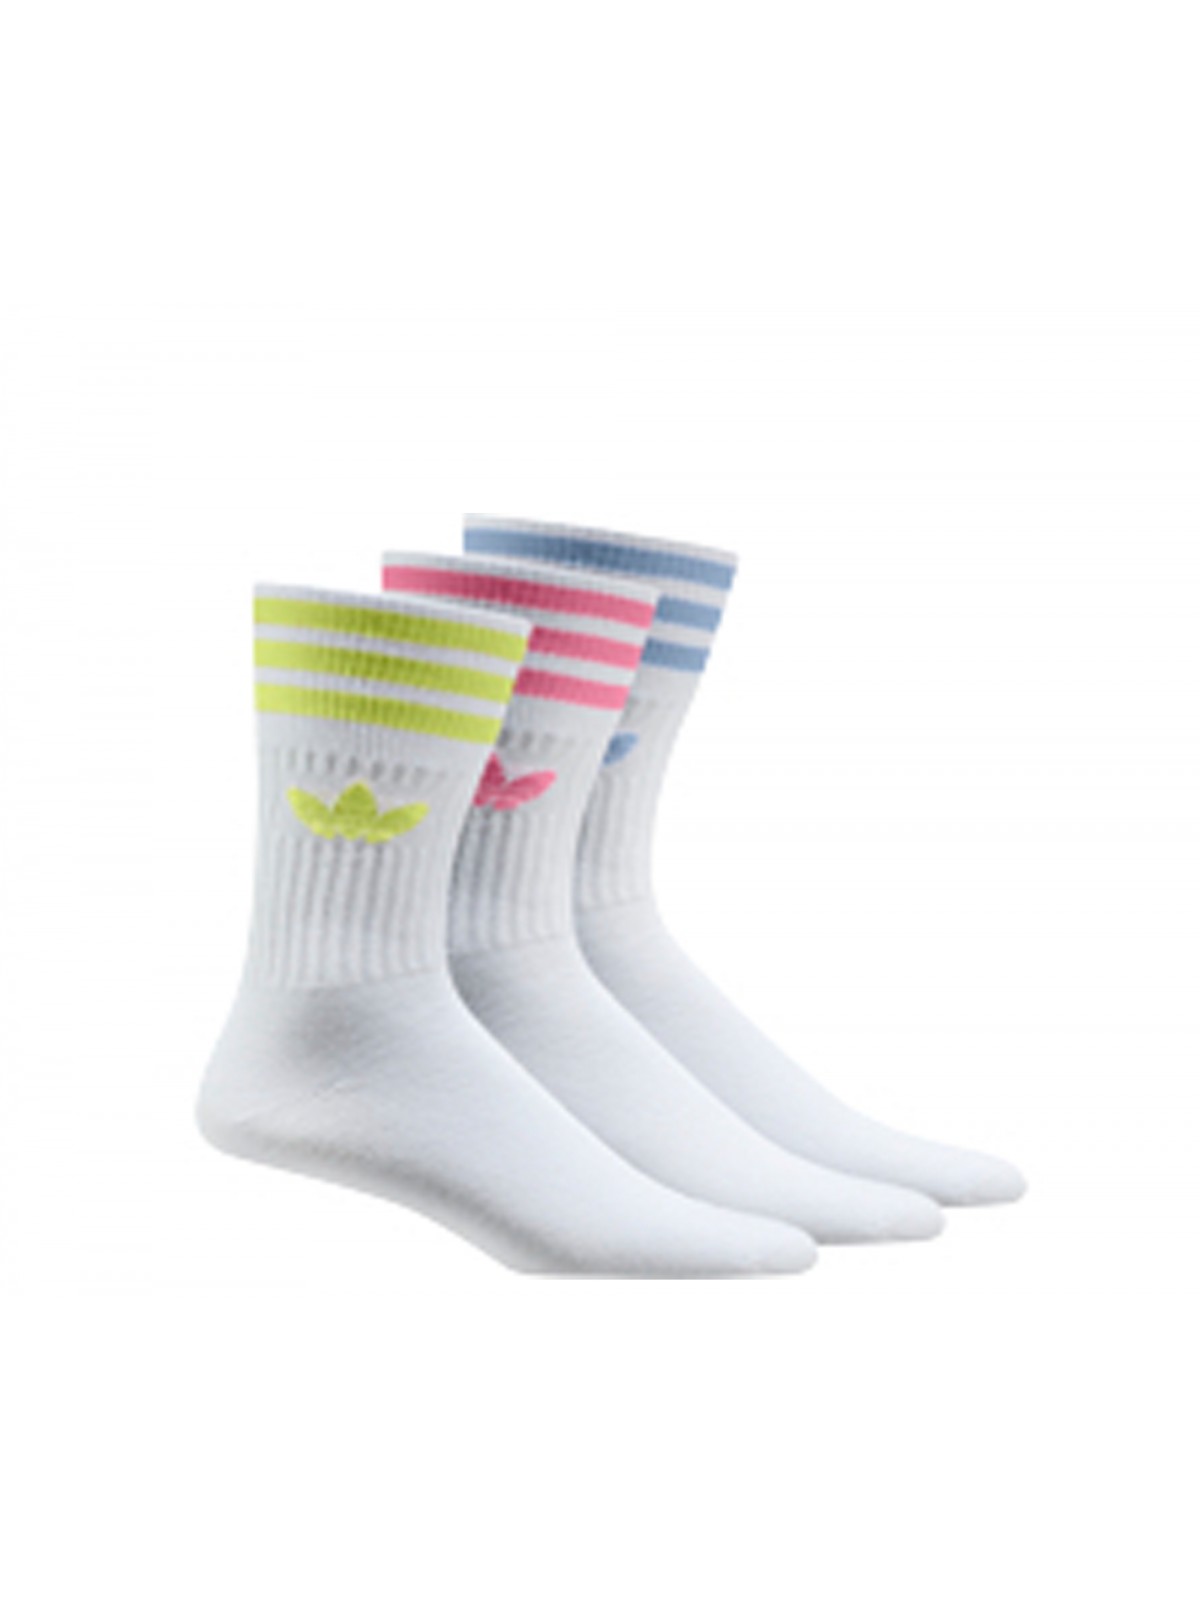 ADIDAS Chaussettes Crew pastel - Marques